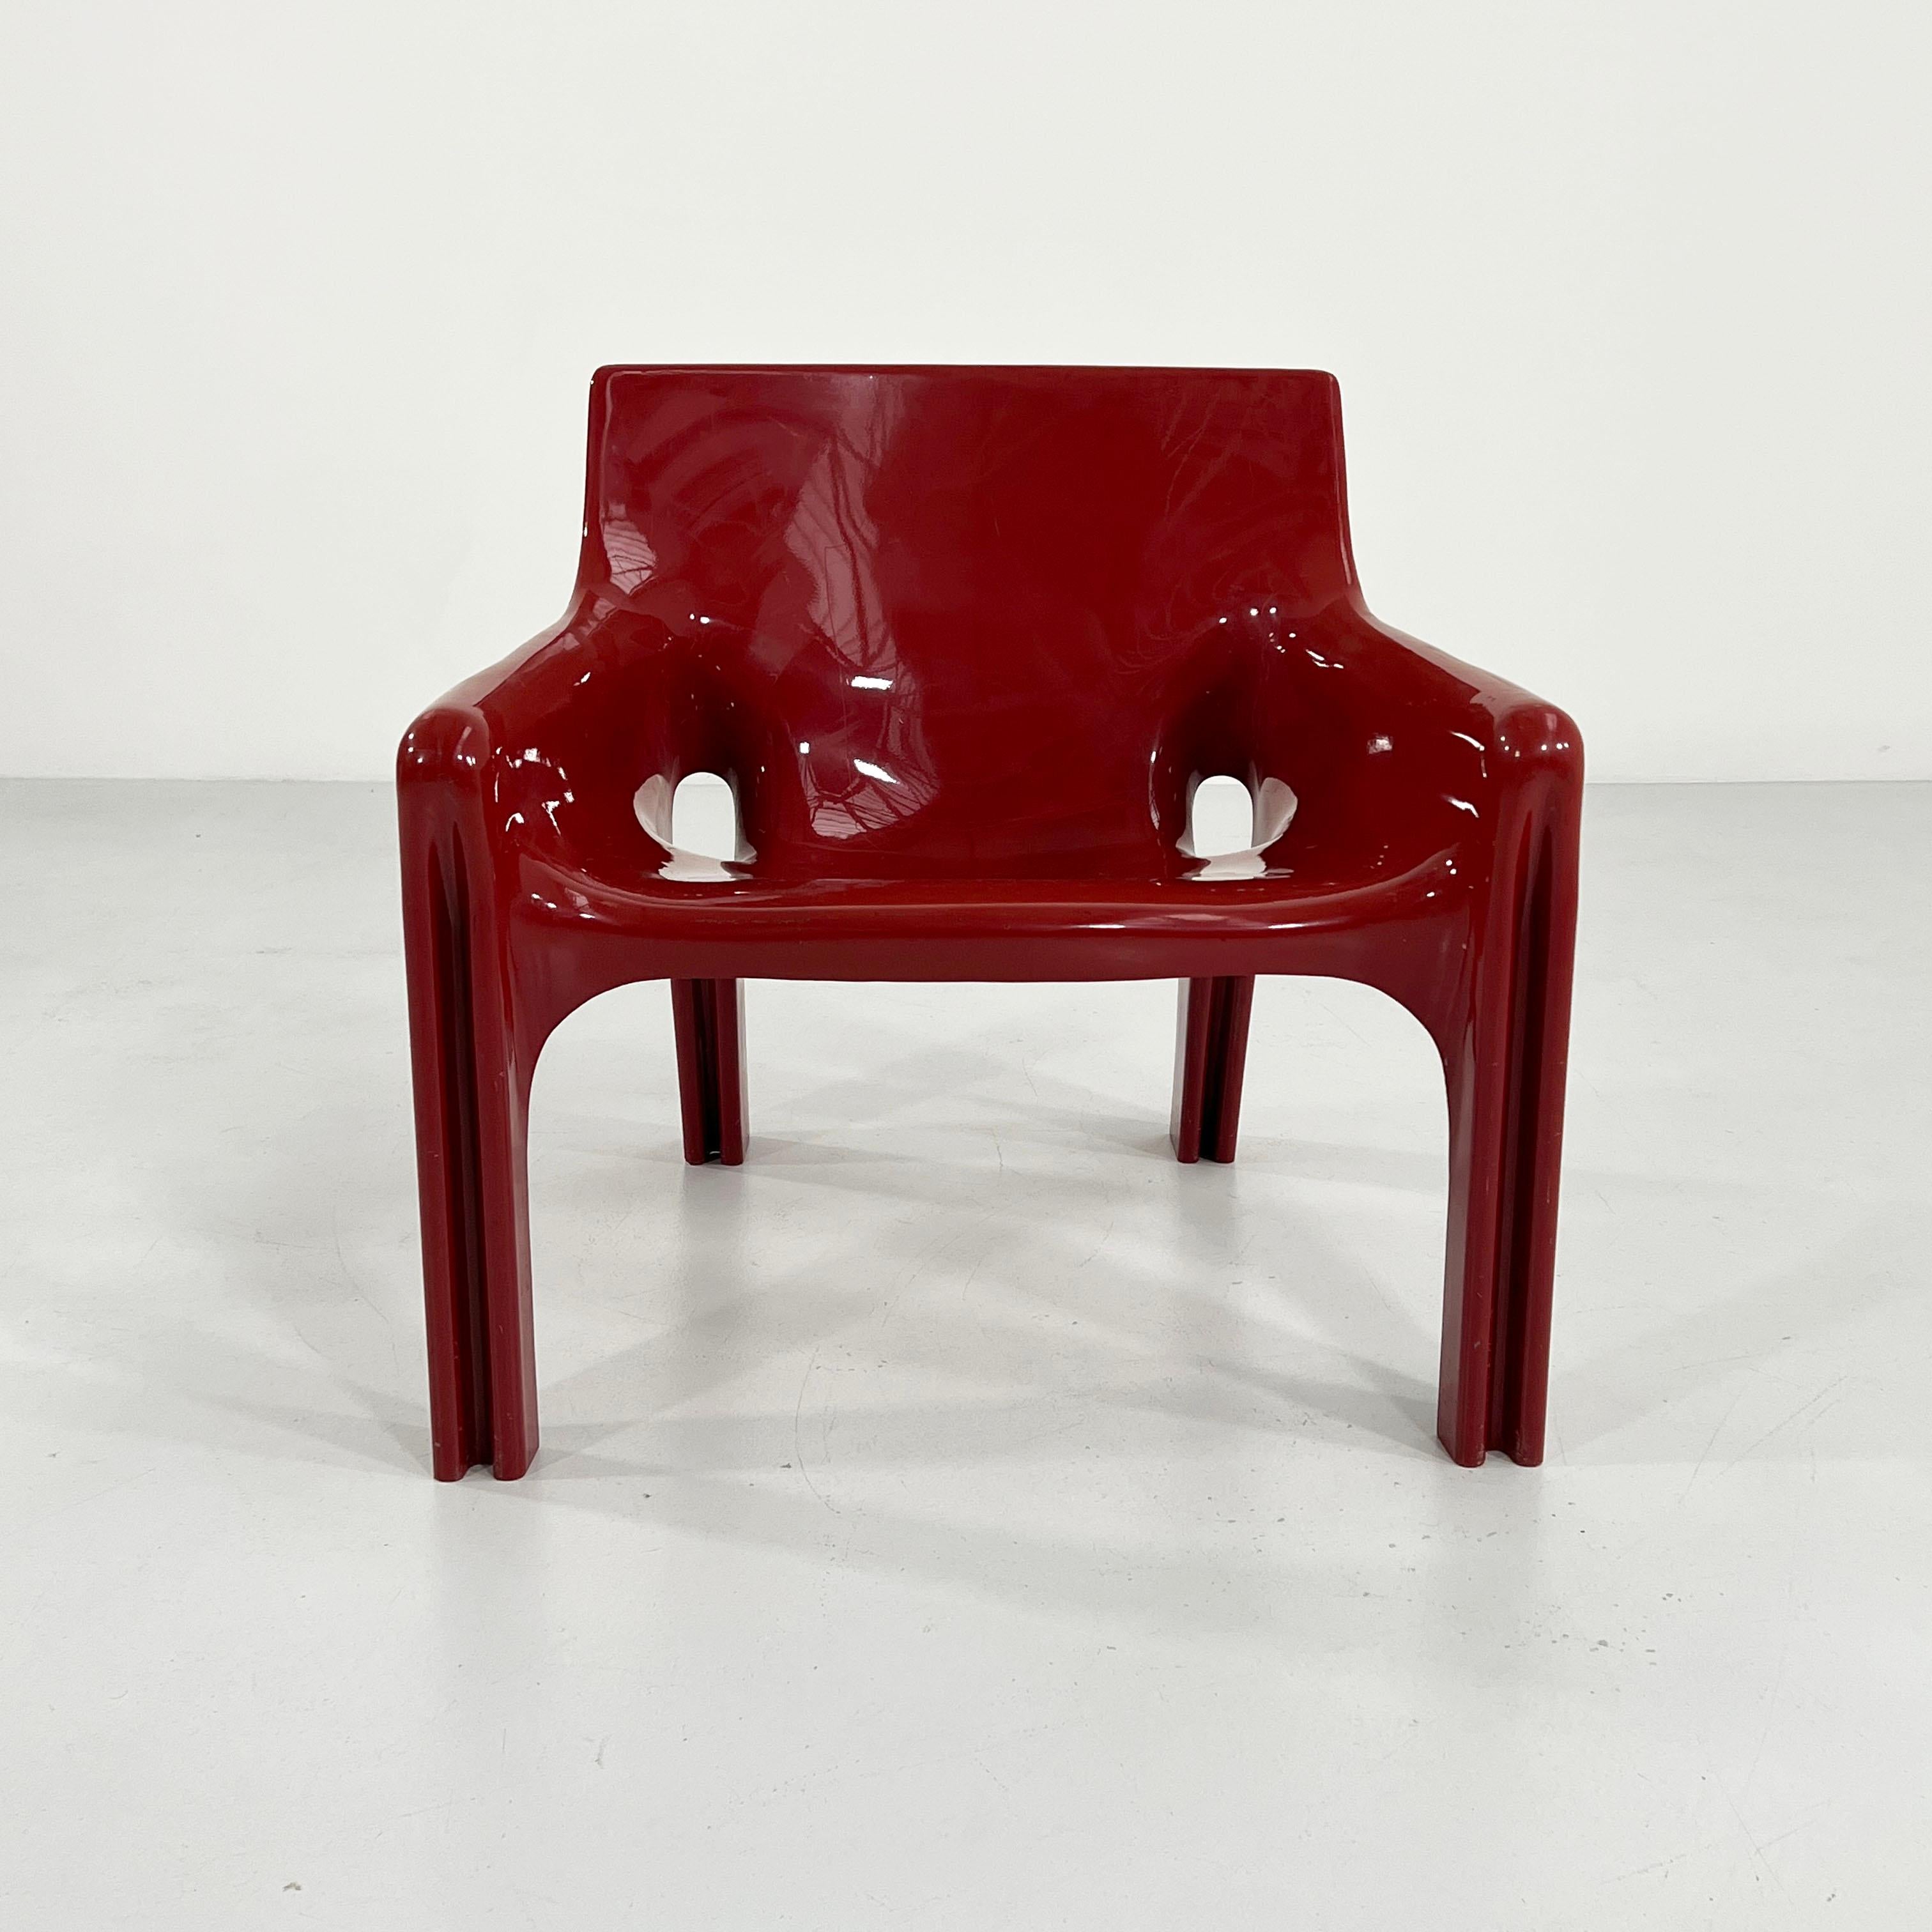 Italian Burgundy Vicario Lounge Chair by Vico Magistretti for Artemide, 1970s